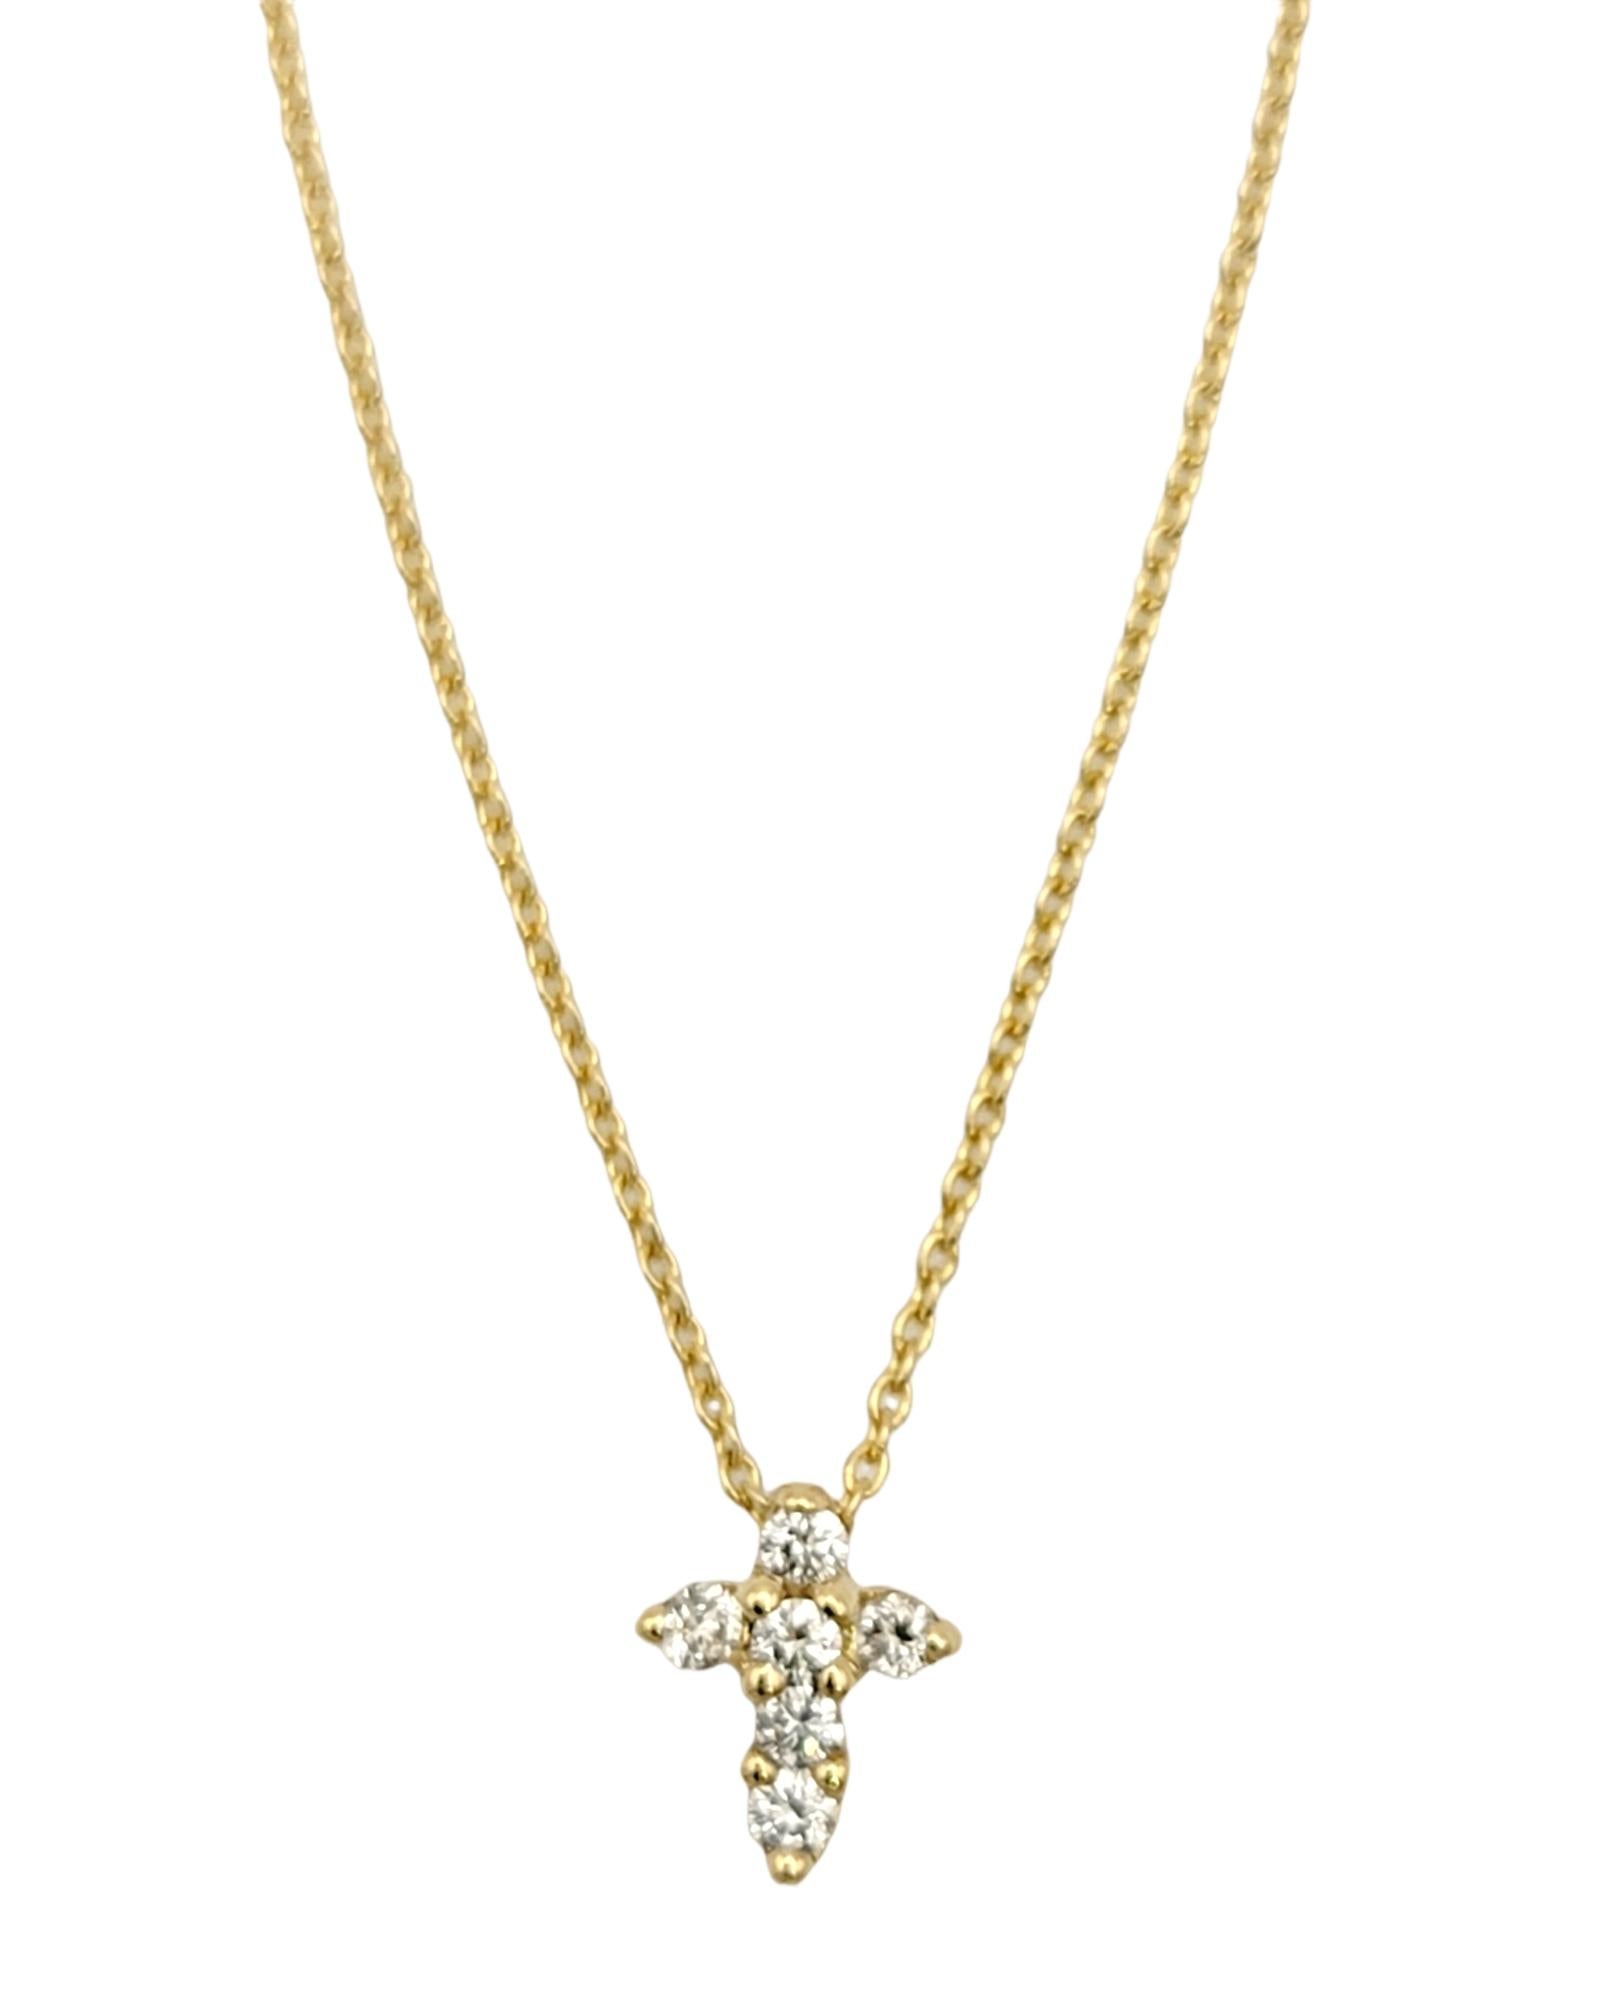 You will love this delicate pave diamond tiny cross necklace by Roberto Coin. Simple and classic, this versatile piece adds a little extra sparkle to any look. This necklace can be worn at the 18